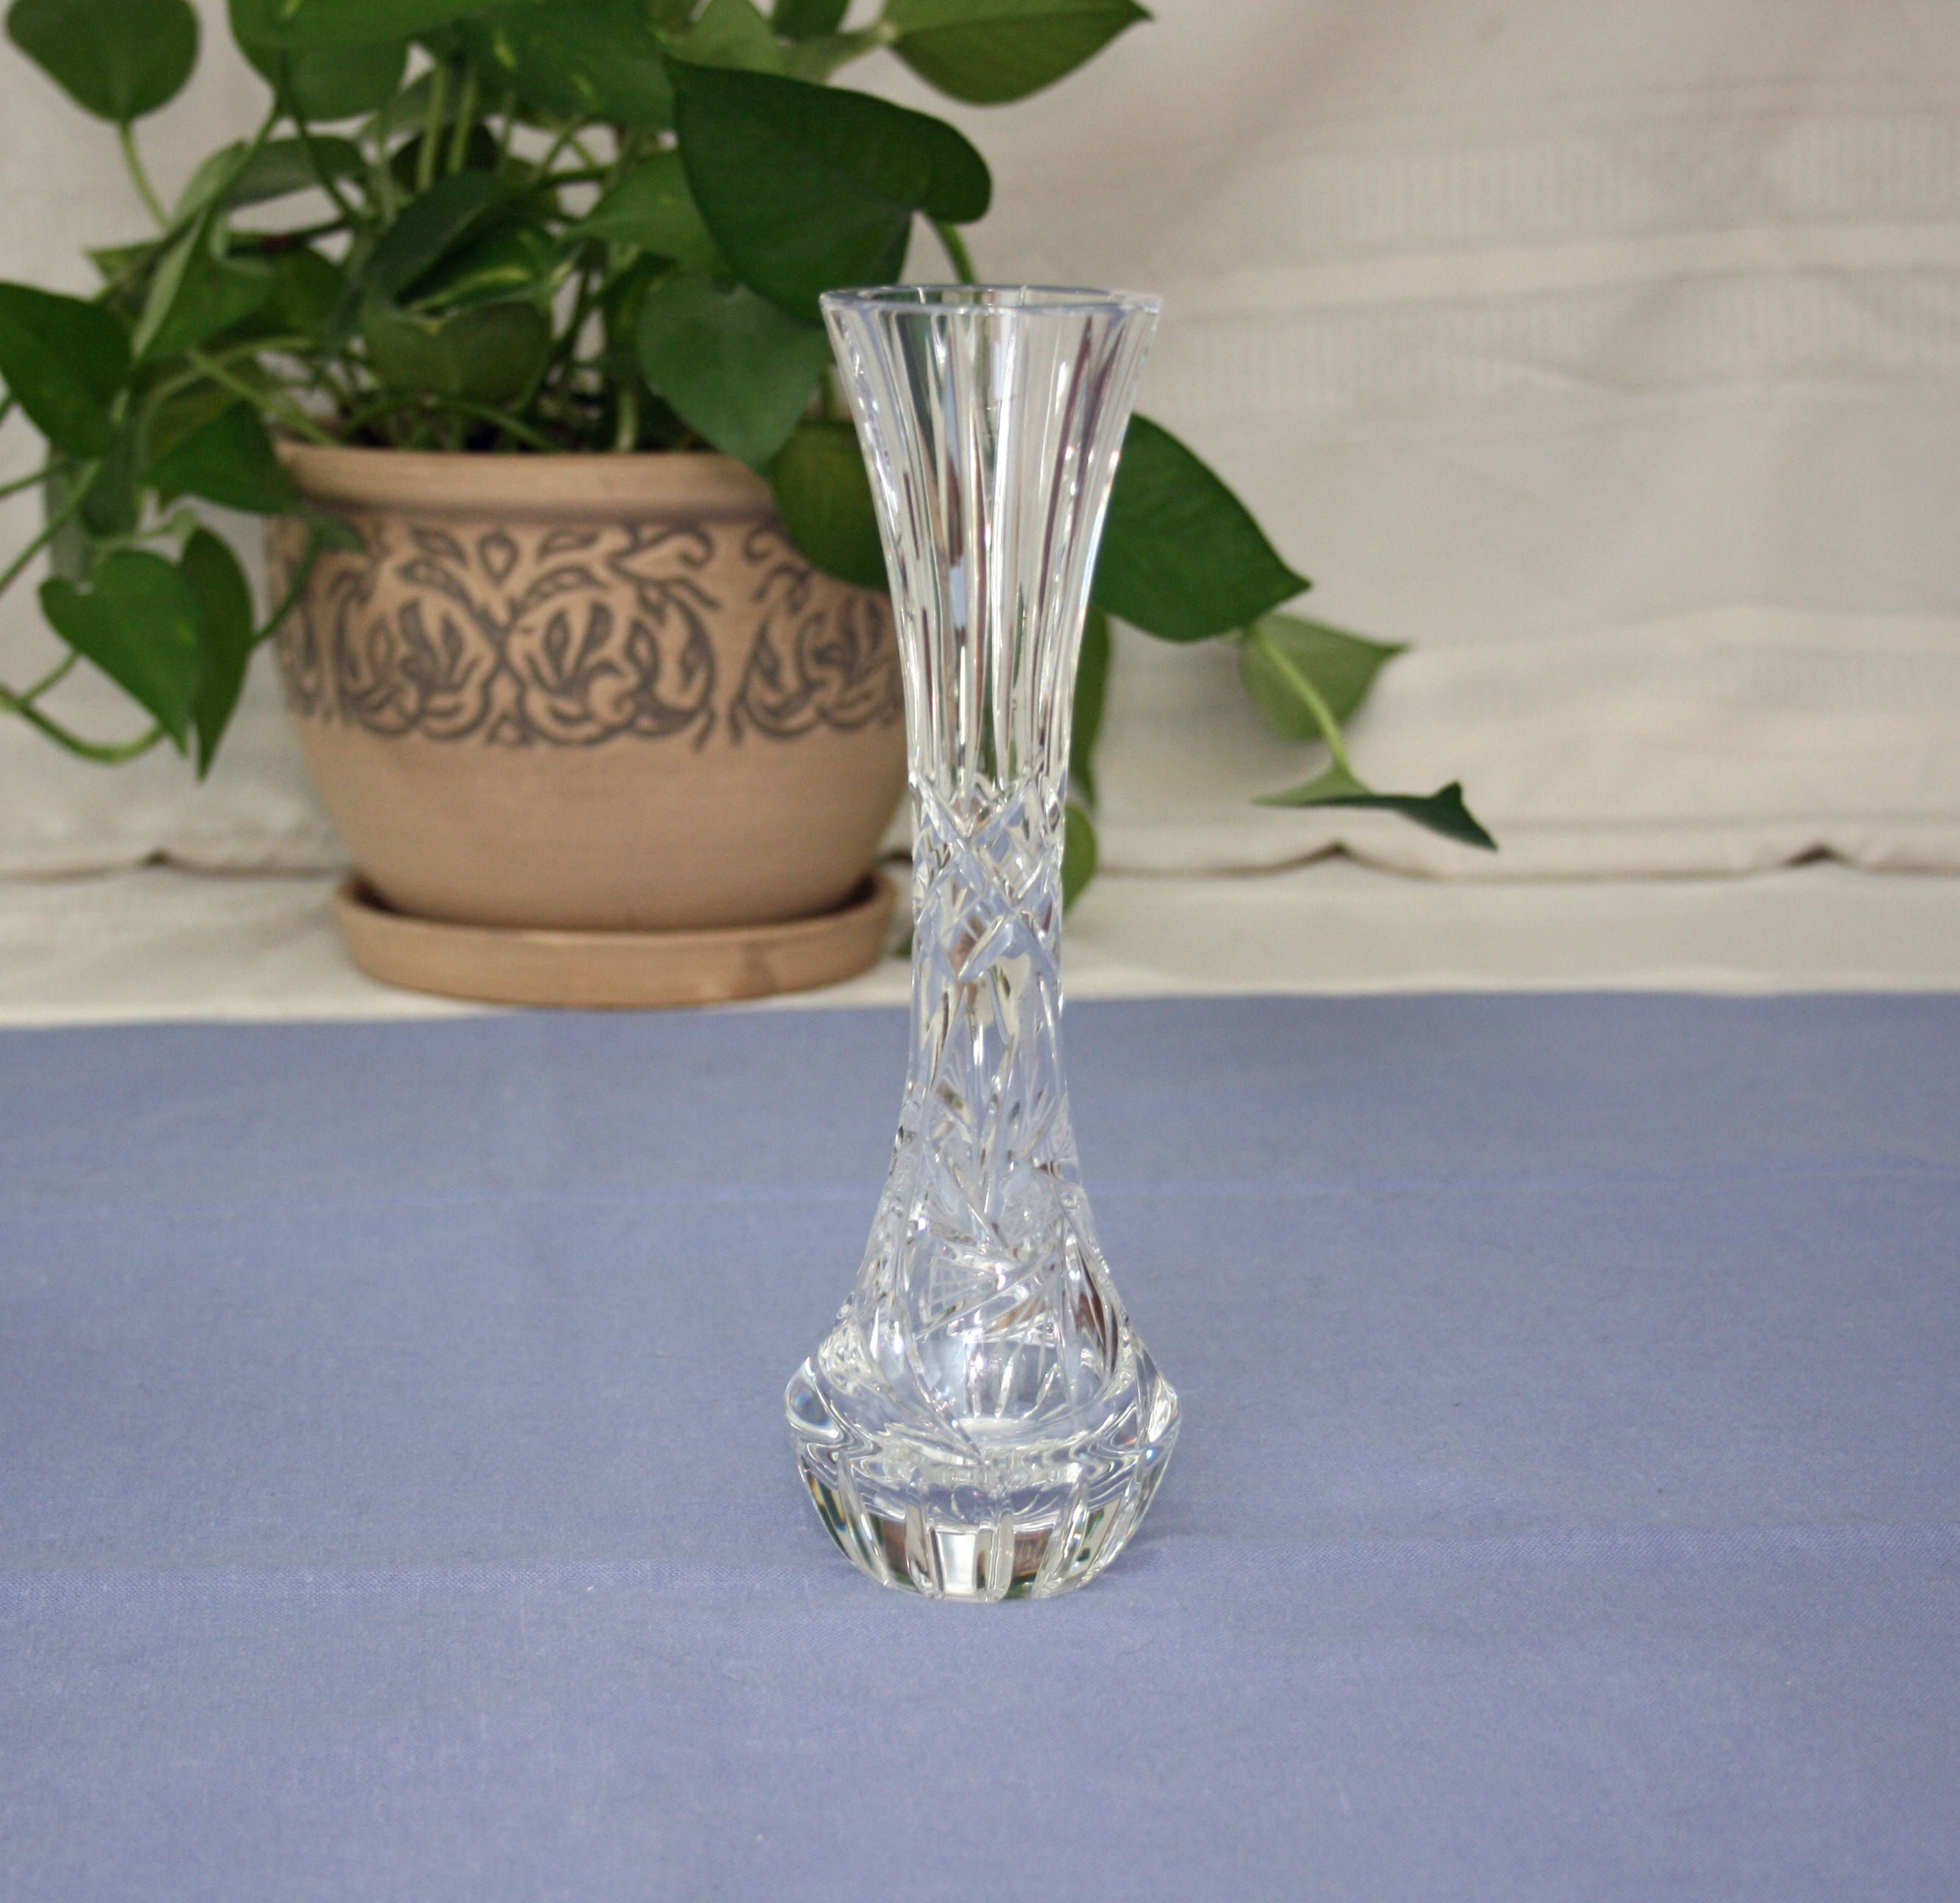 17 Elegant Waterford Crystal Vase 14 Inch 2024 free download waterford crystal vase 14 inch of vintage pair 6 inch pressed glass candlesticks with hand c for vintage lead crystal fluted bud vase hand cut swirled star pinwheel flower glass vase home de